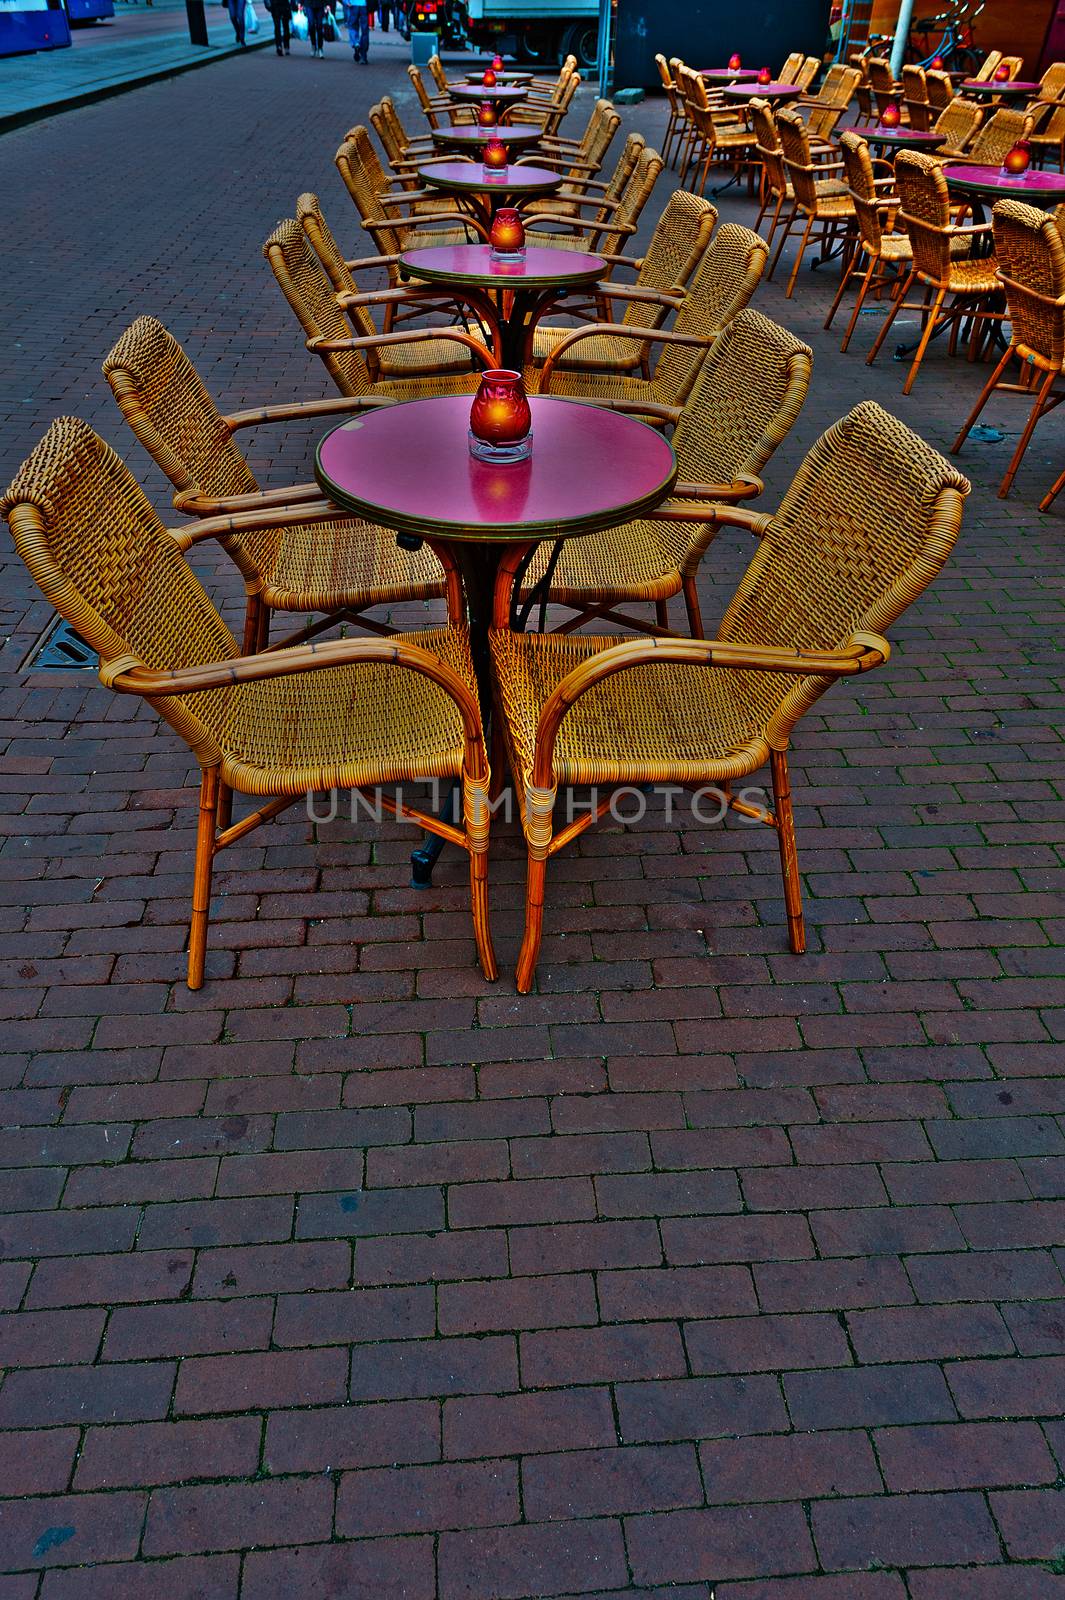 Wicker Chairs and Tables in a Street Cafe at Night